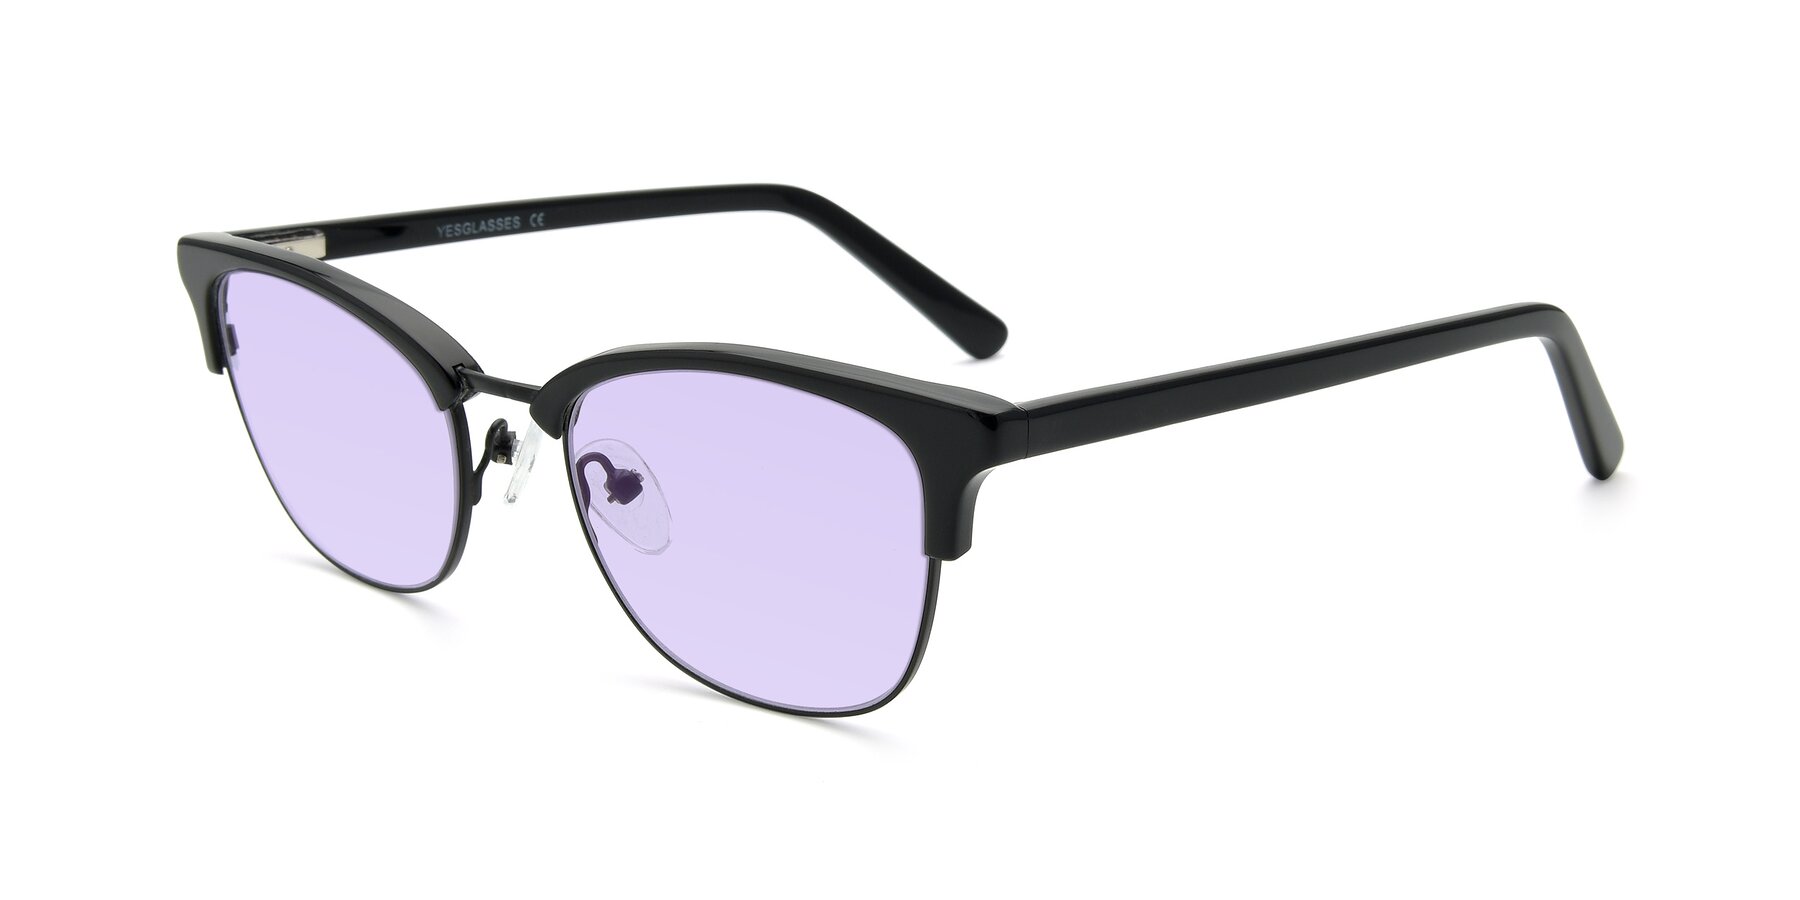 Angle of 17463 in Black with Light Purple Tinted Lenses